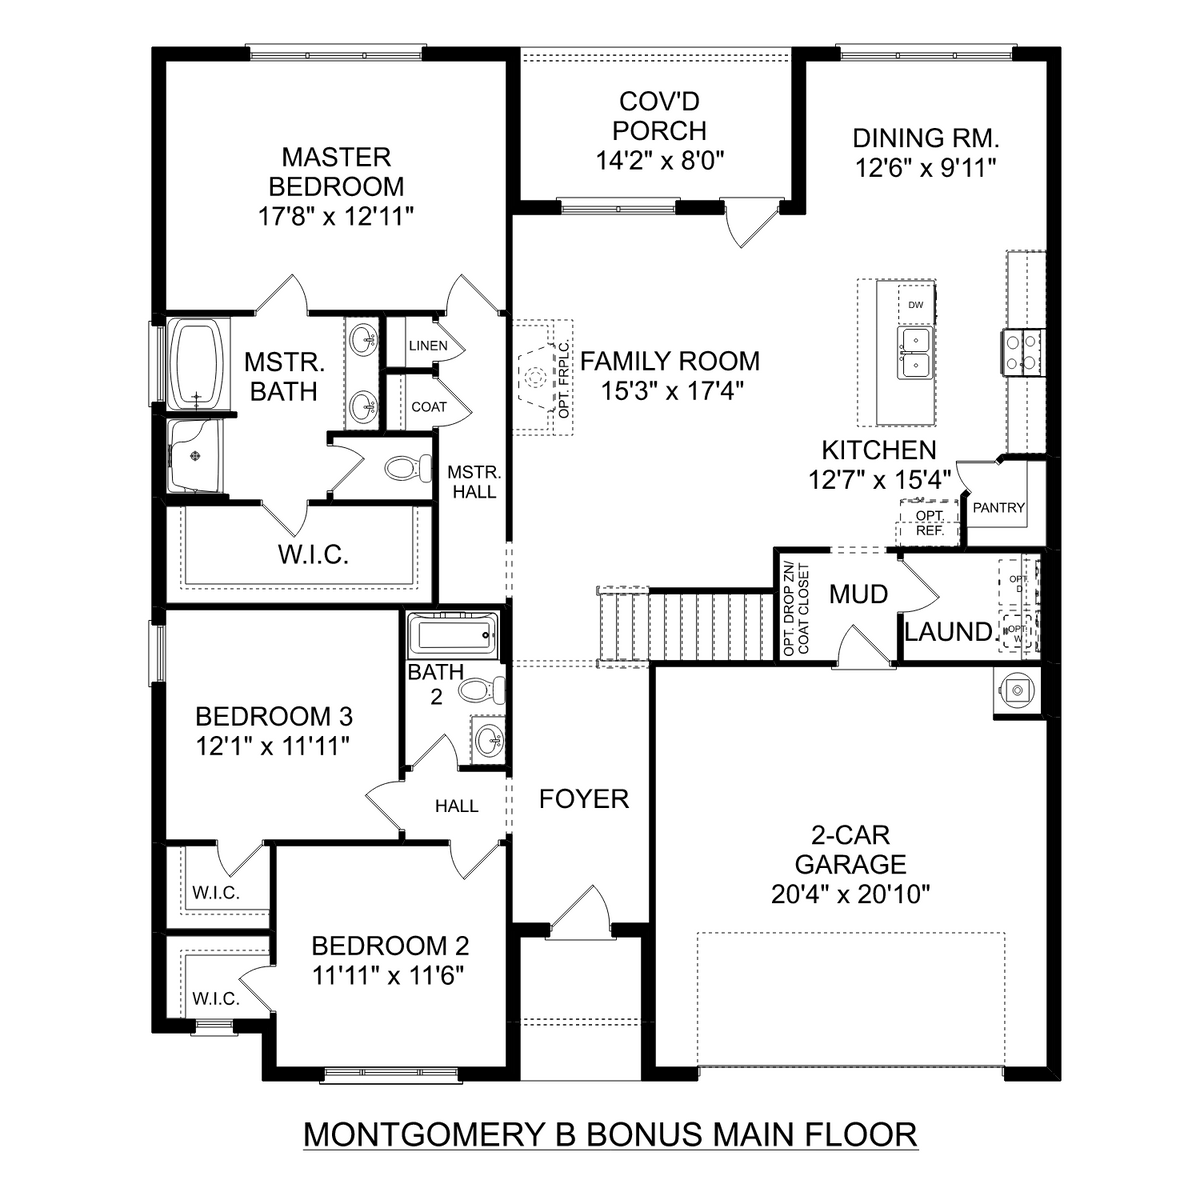 1 - The Montgomery B With Bonus buildable floor plan layout in Davidson Homes' River Road Estates community.